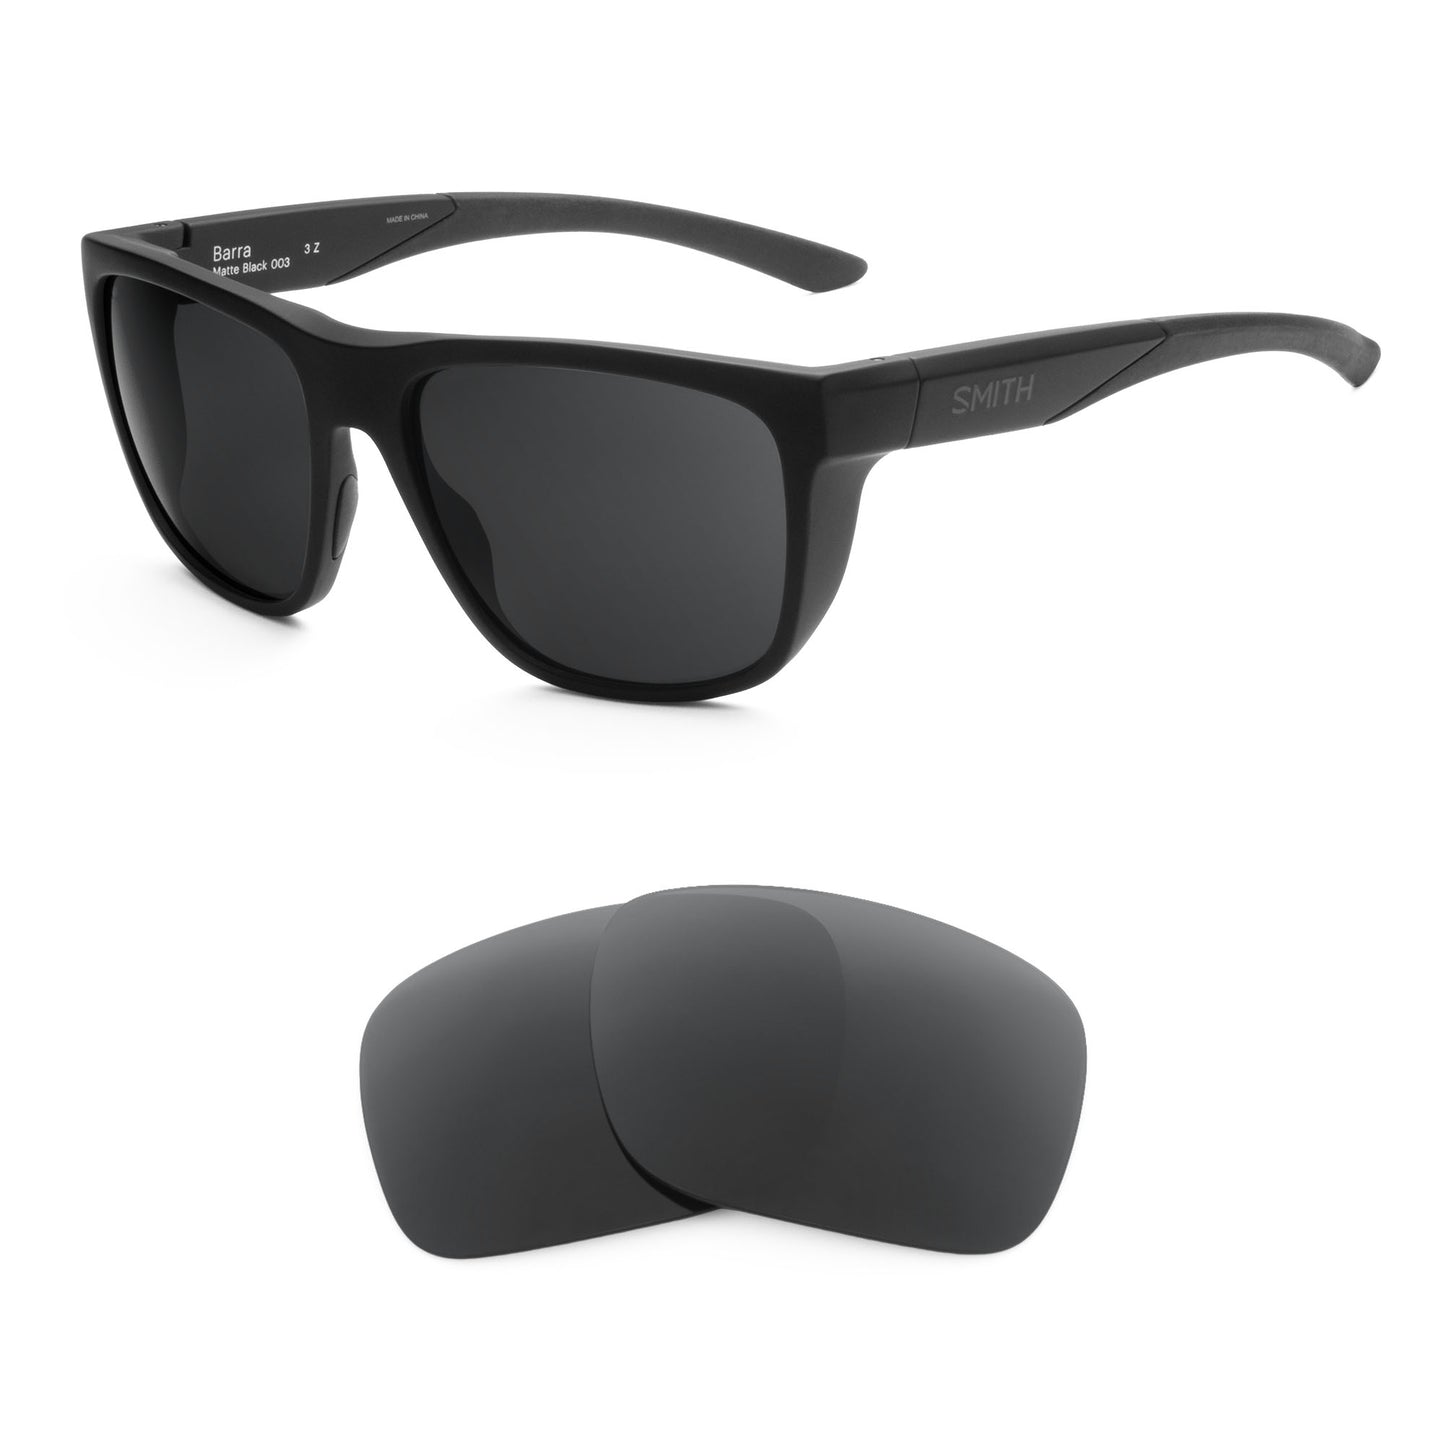 Smith Barra sunglasses with replacement lenses